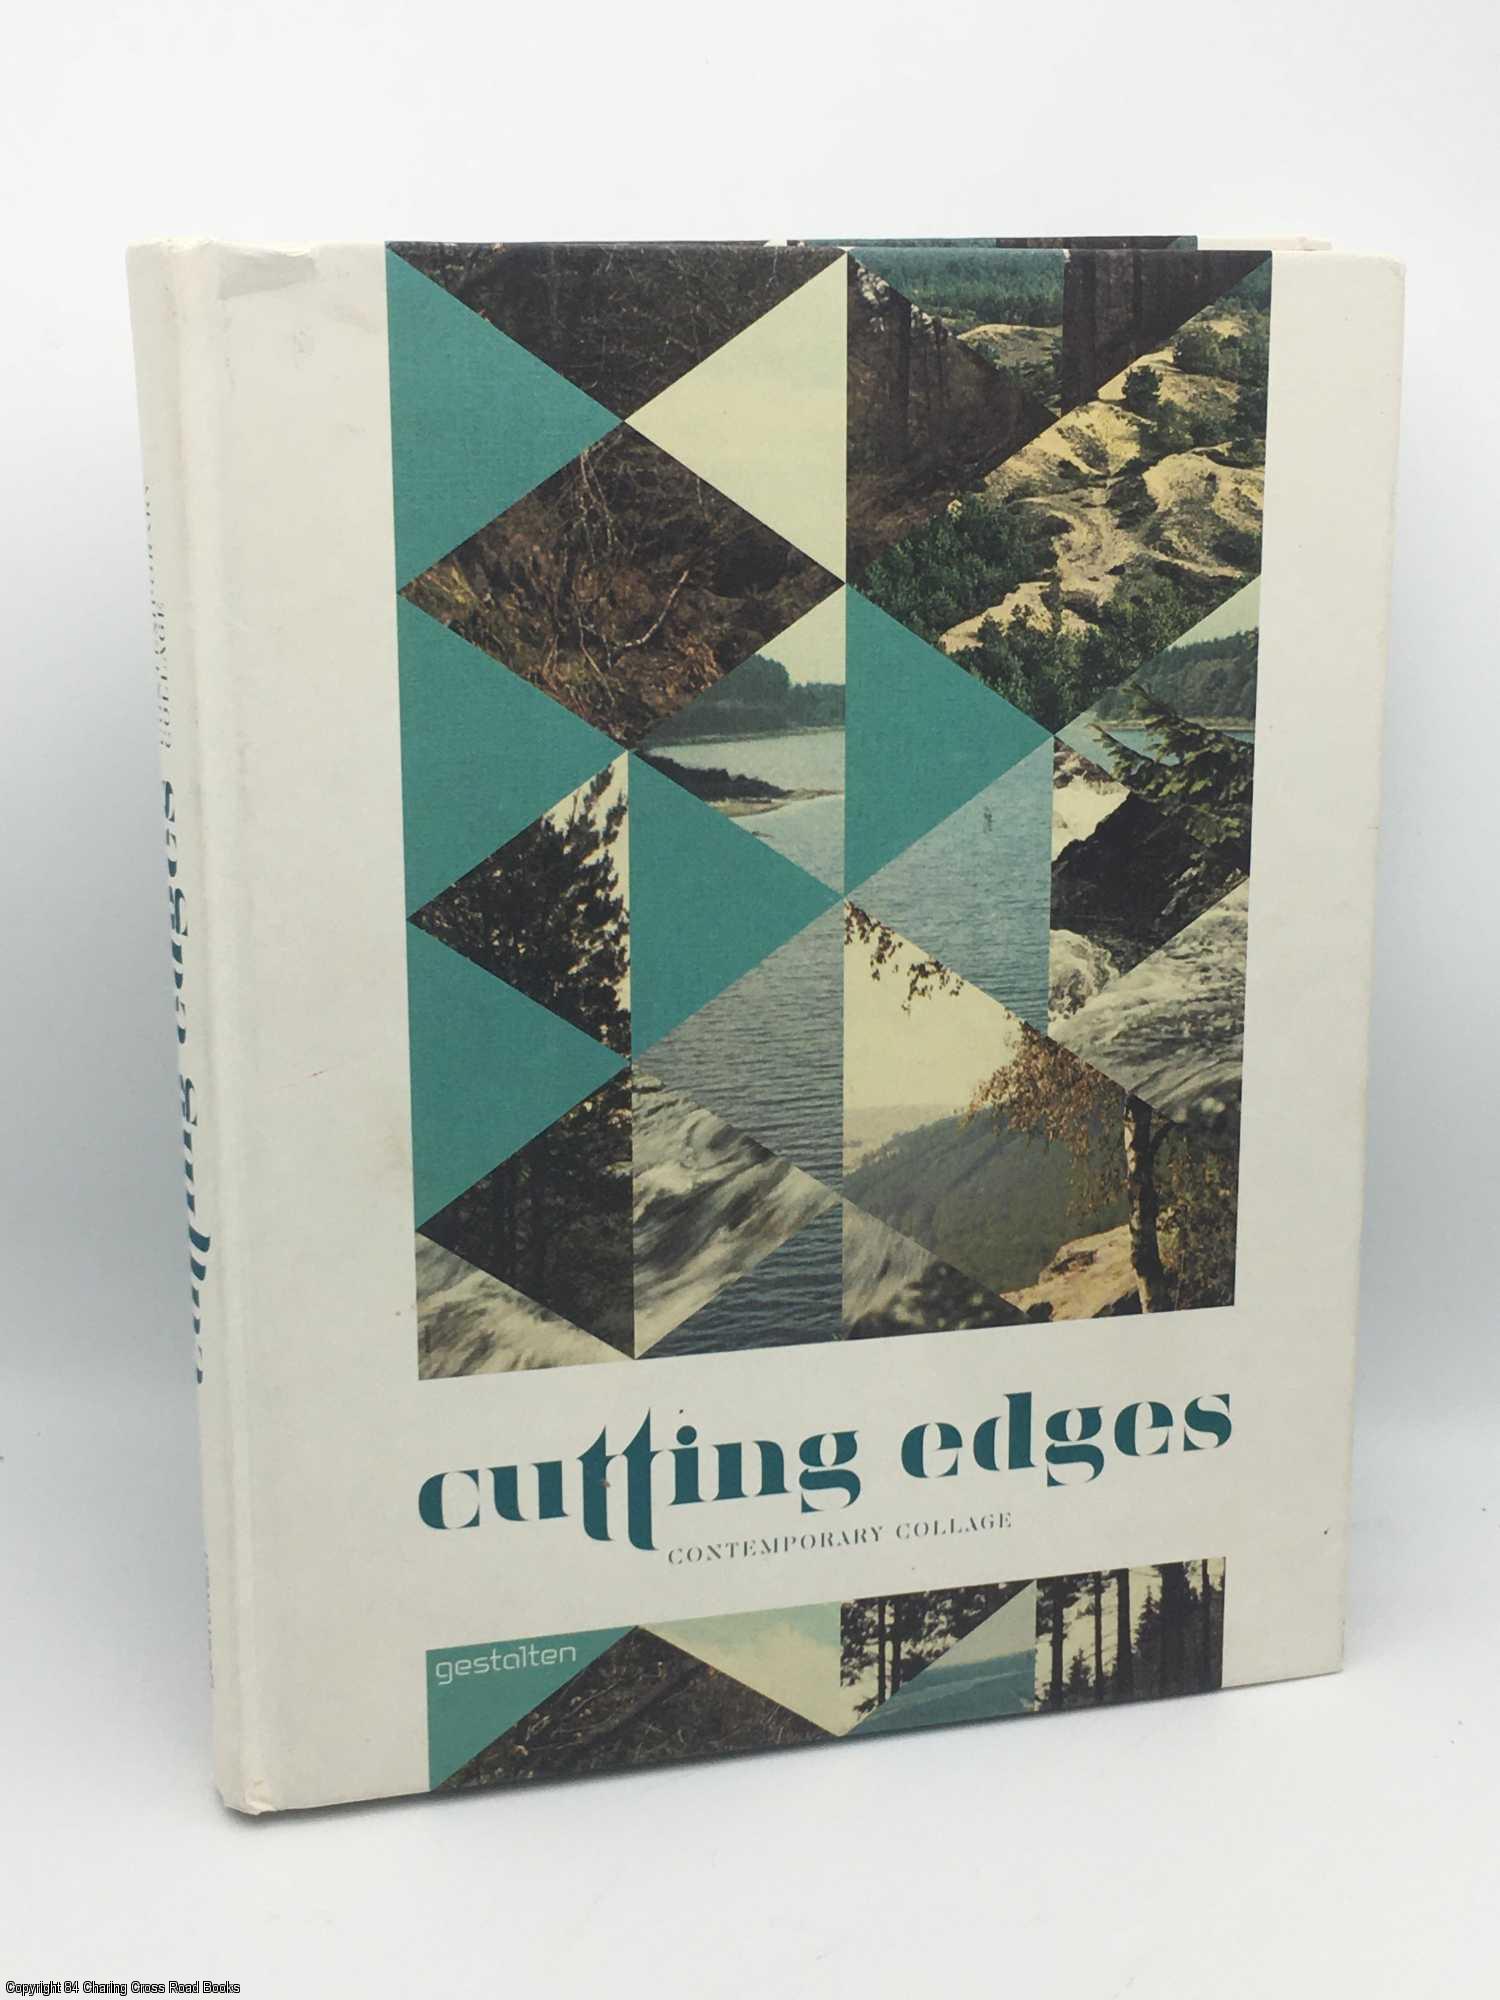 Cutting Edges: Contemporary Collage by Hellige, Klanten on 84 Charing Cross  Rare Books